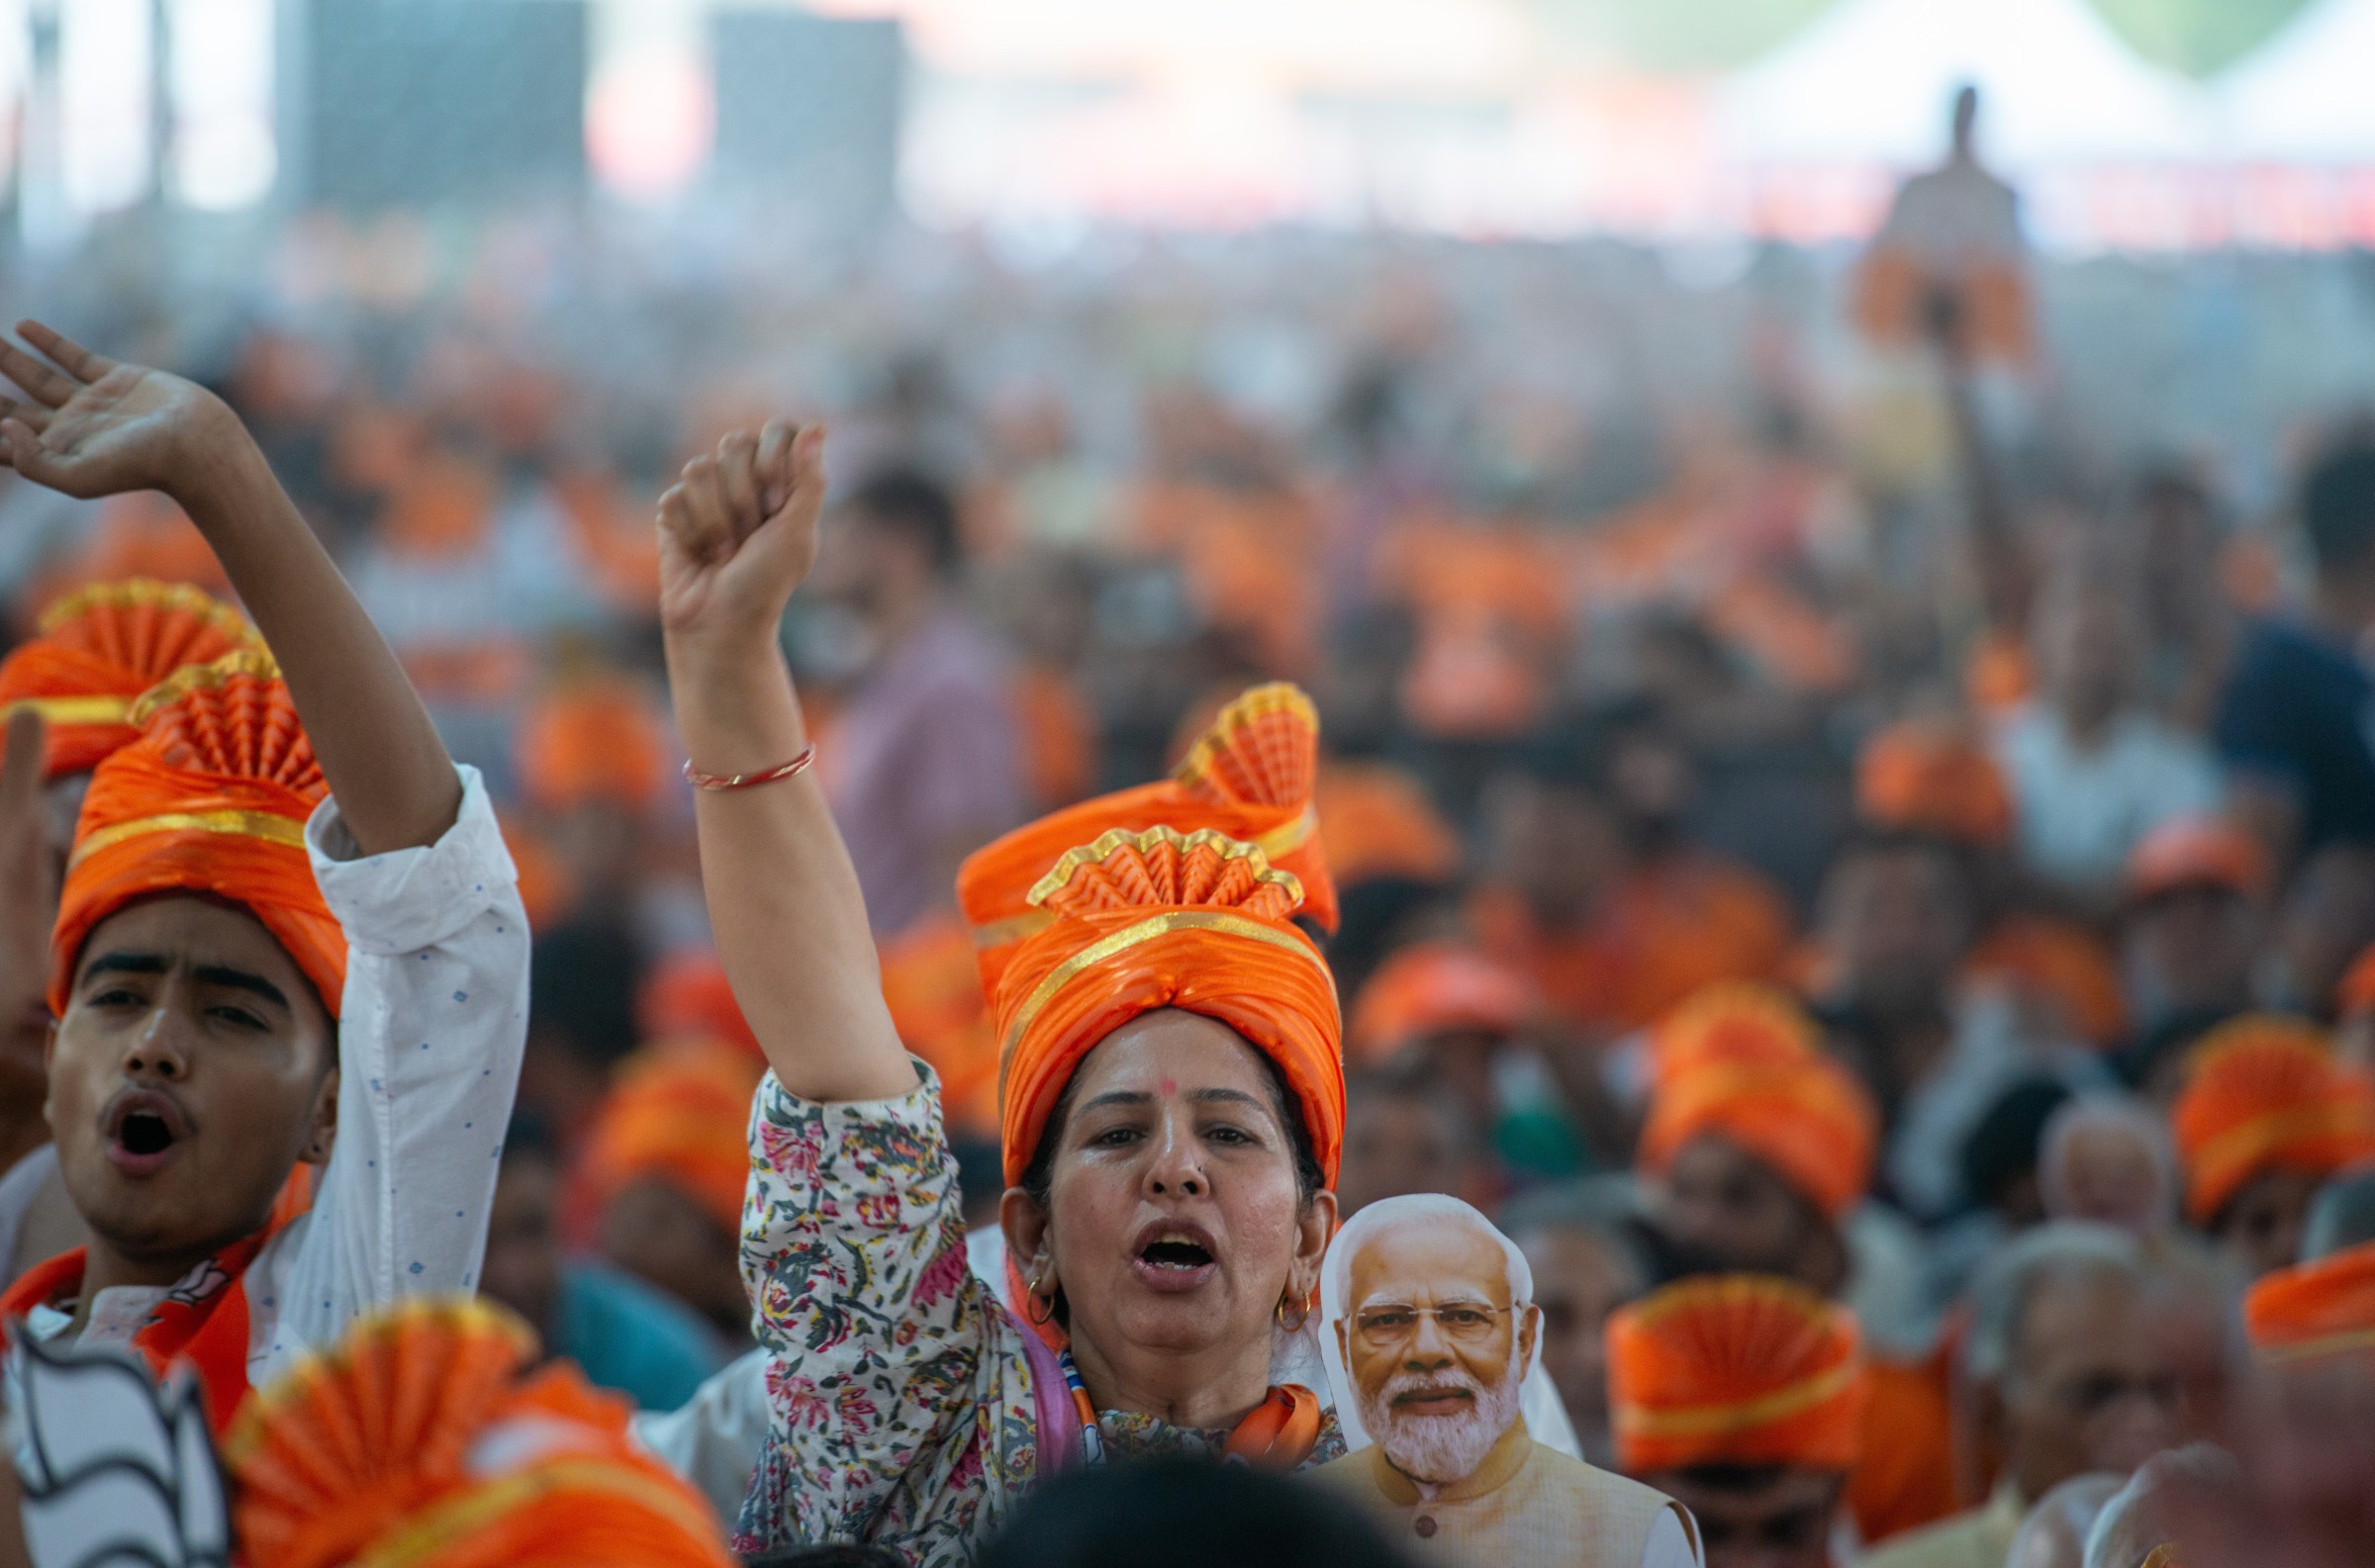 The enormous stakes of India’s election